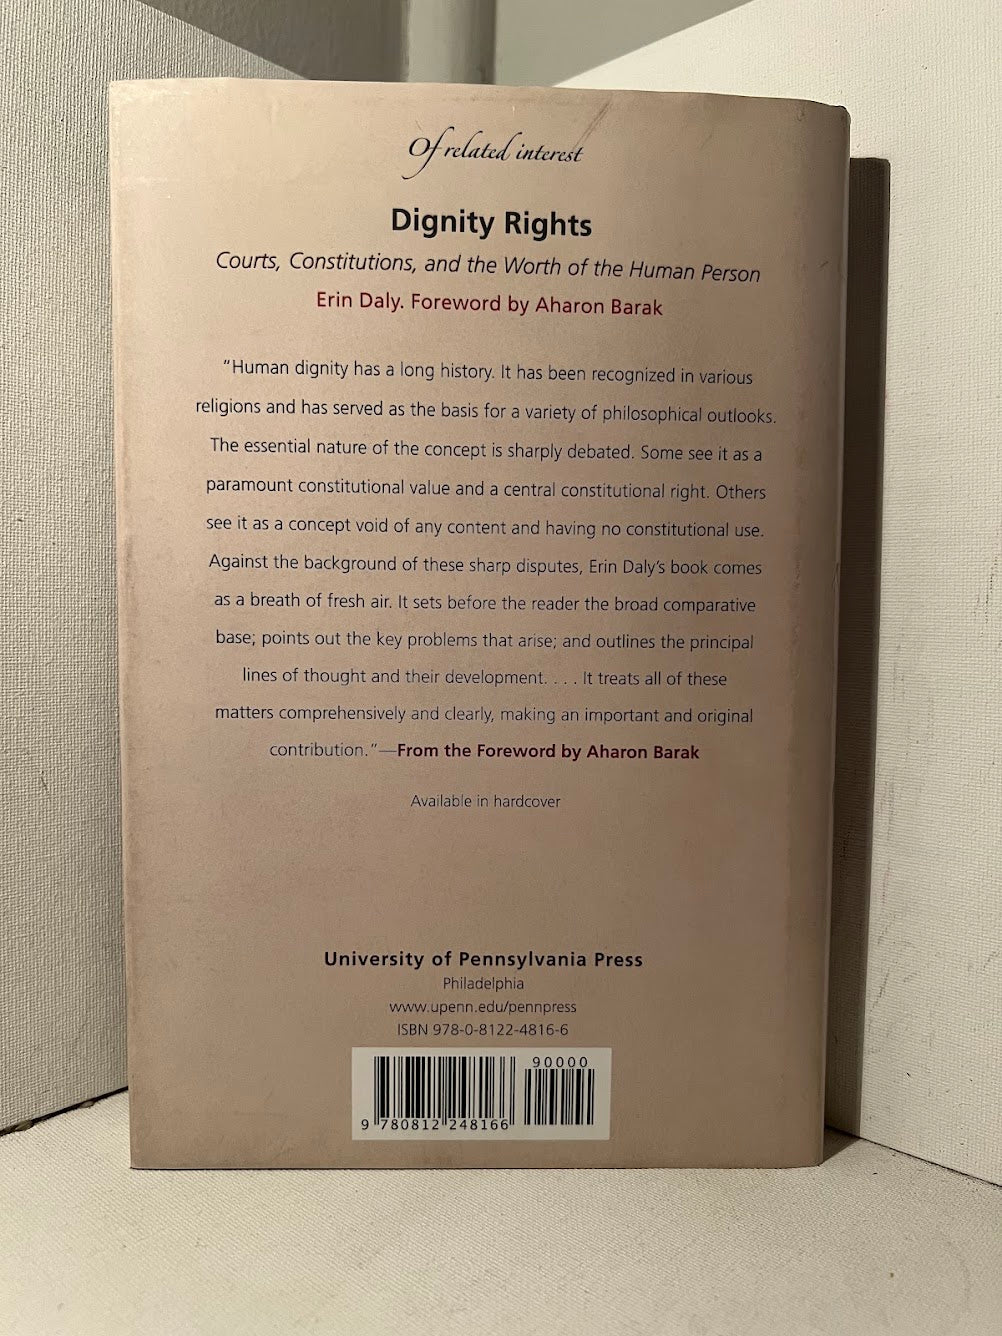 The Promise of Human Rights - Constitutional Government, Democratic Legitimacy, and International Law by Jamie Mayerfeld